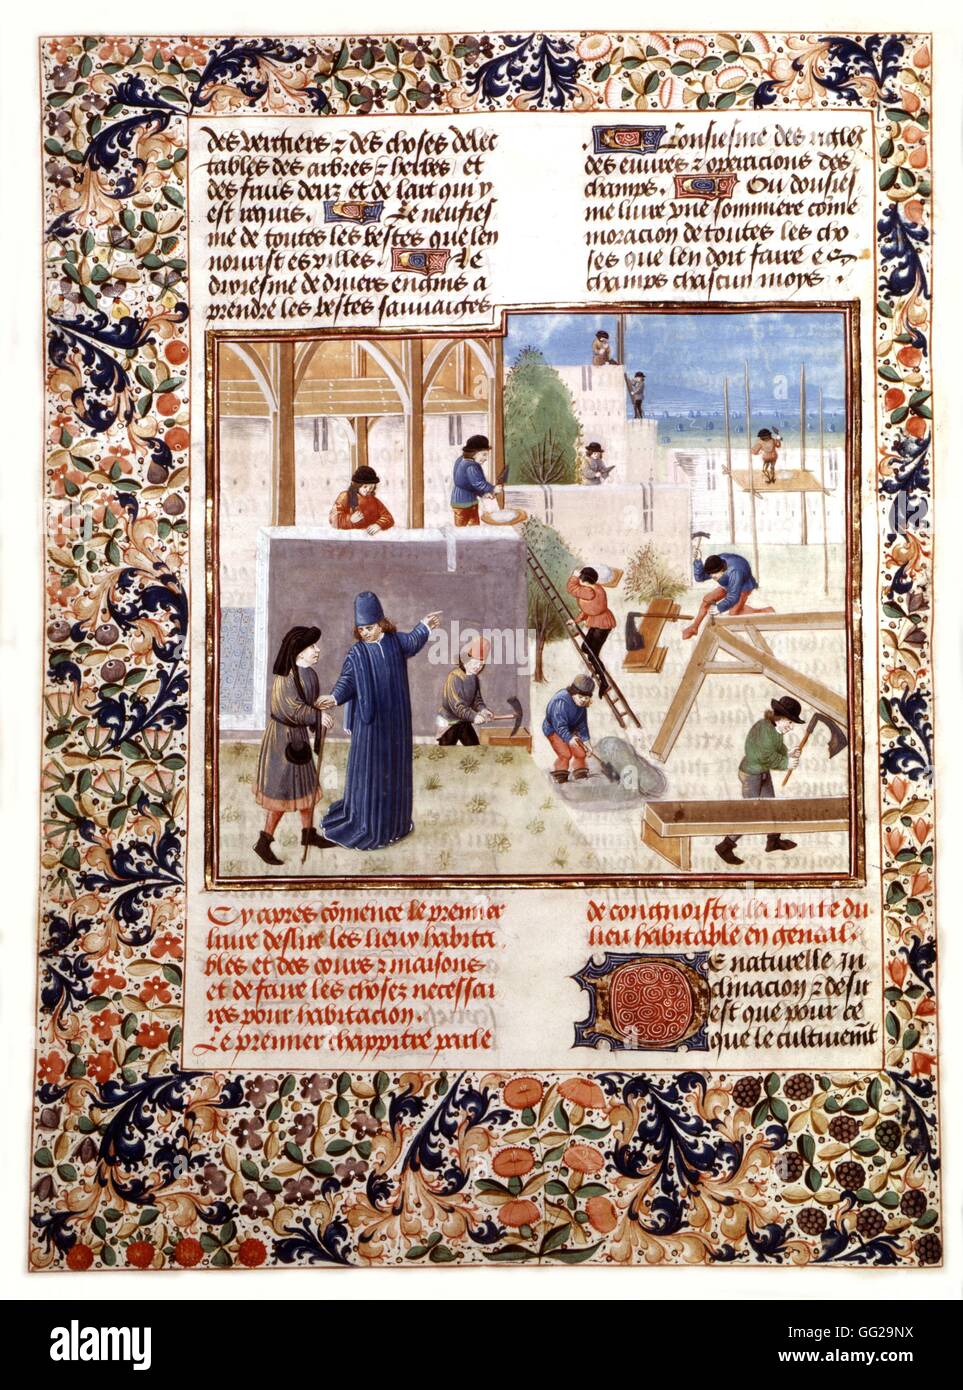 Miniature by Pierre de Crescens, in 'The Book of rural tasks' Workers, masons, carpenter. Treatise of agriculture written in the early 14th century. Copy made for Antoine le Grand, son of Philippe le Bon. Manuscript 15th century Stock Photo